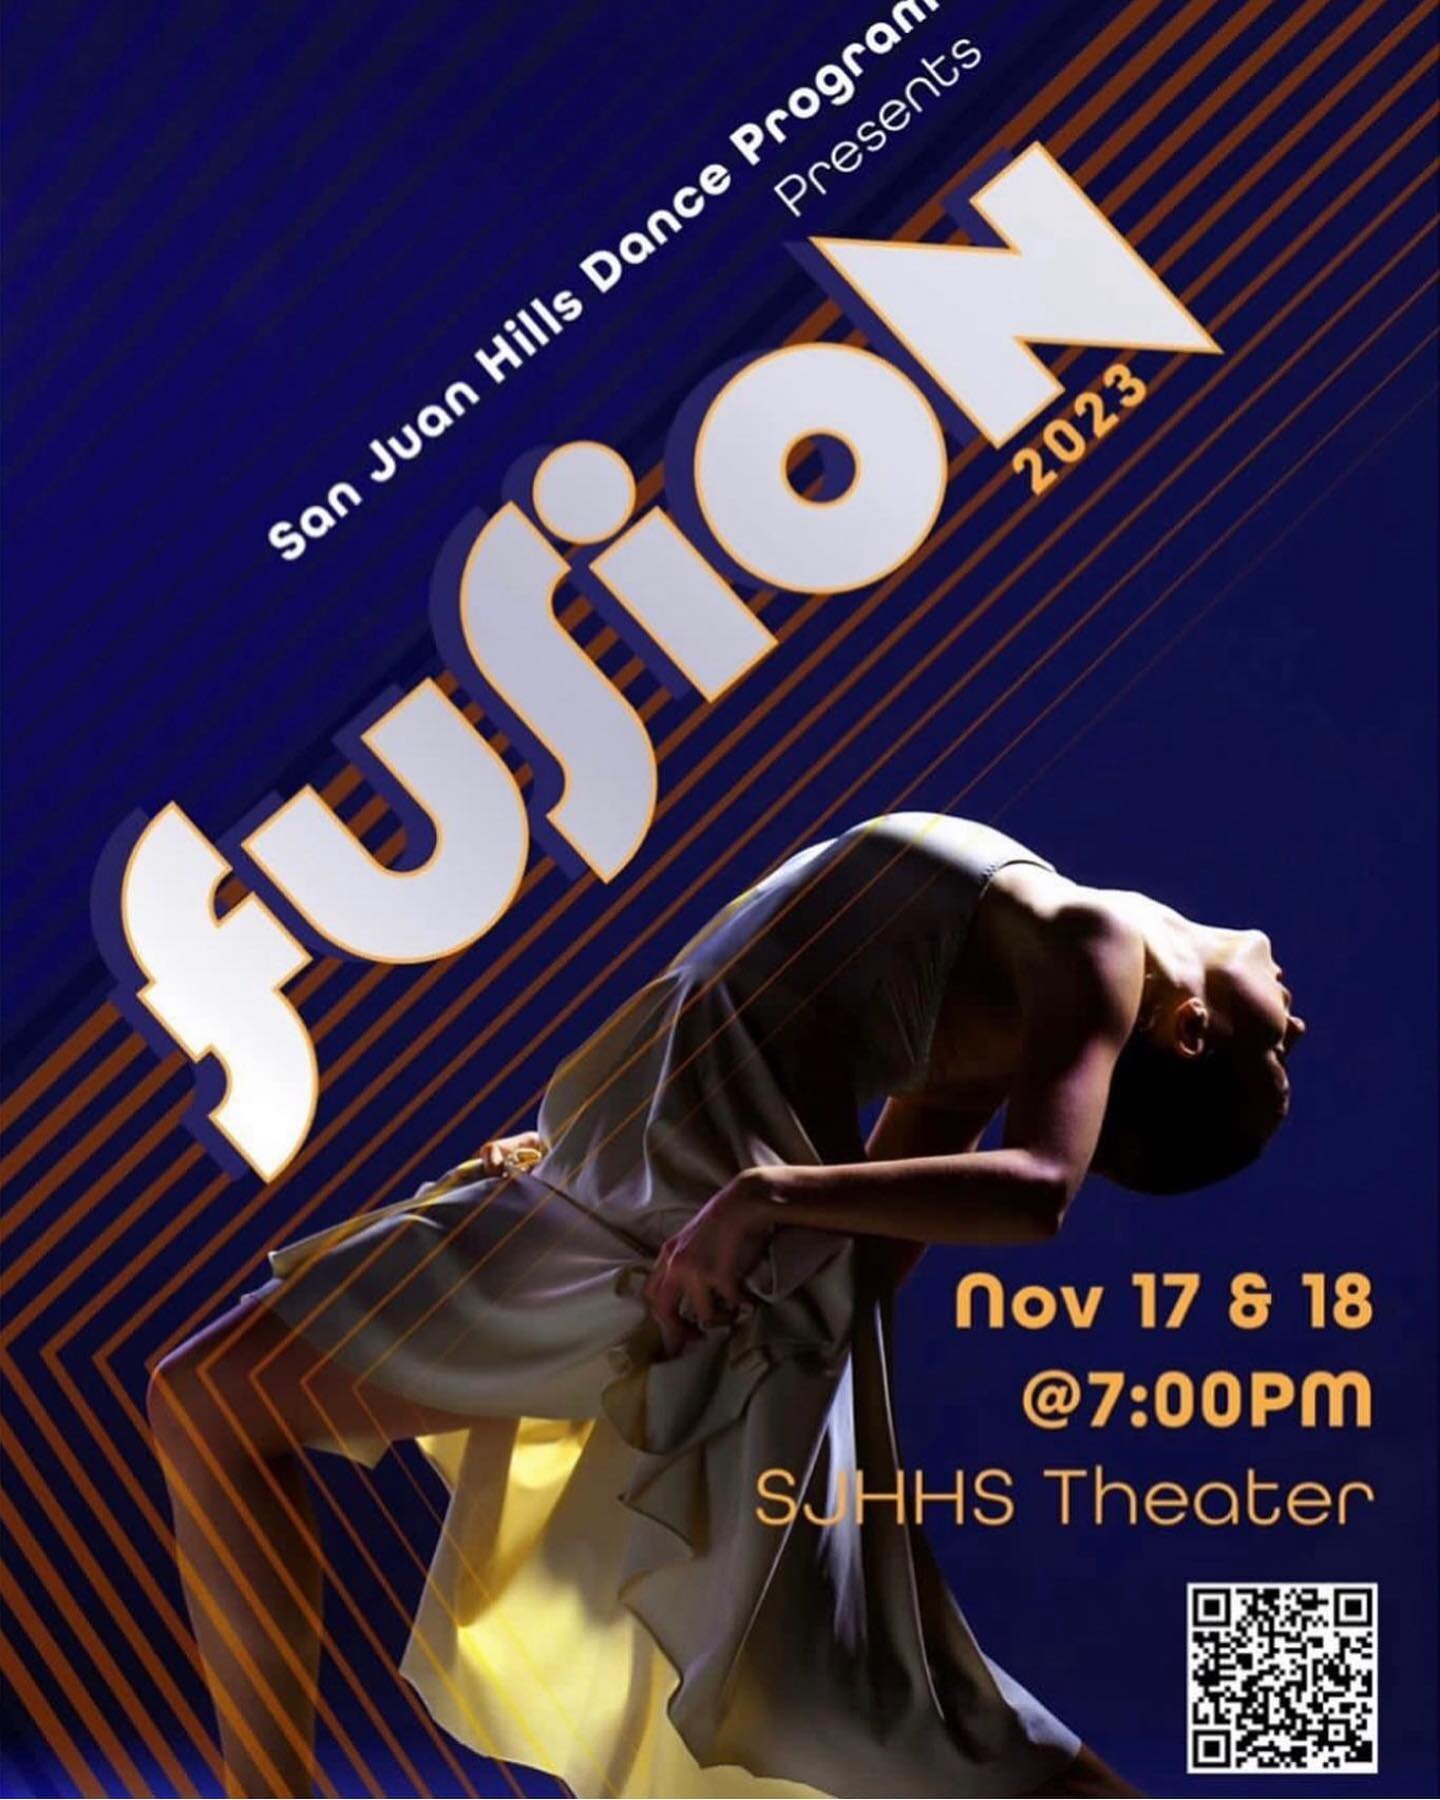 Fusion Dance Show this weekend! 
💃🕺👯&zwj;♀️

(Link in bio)